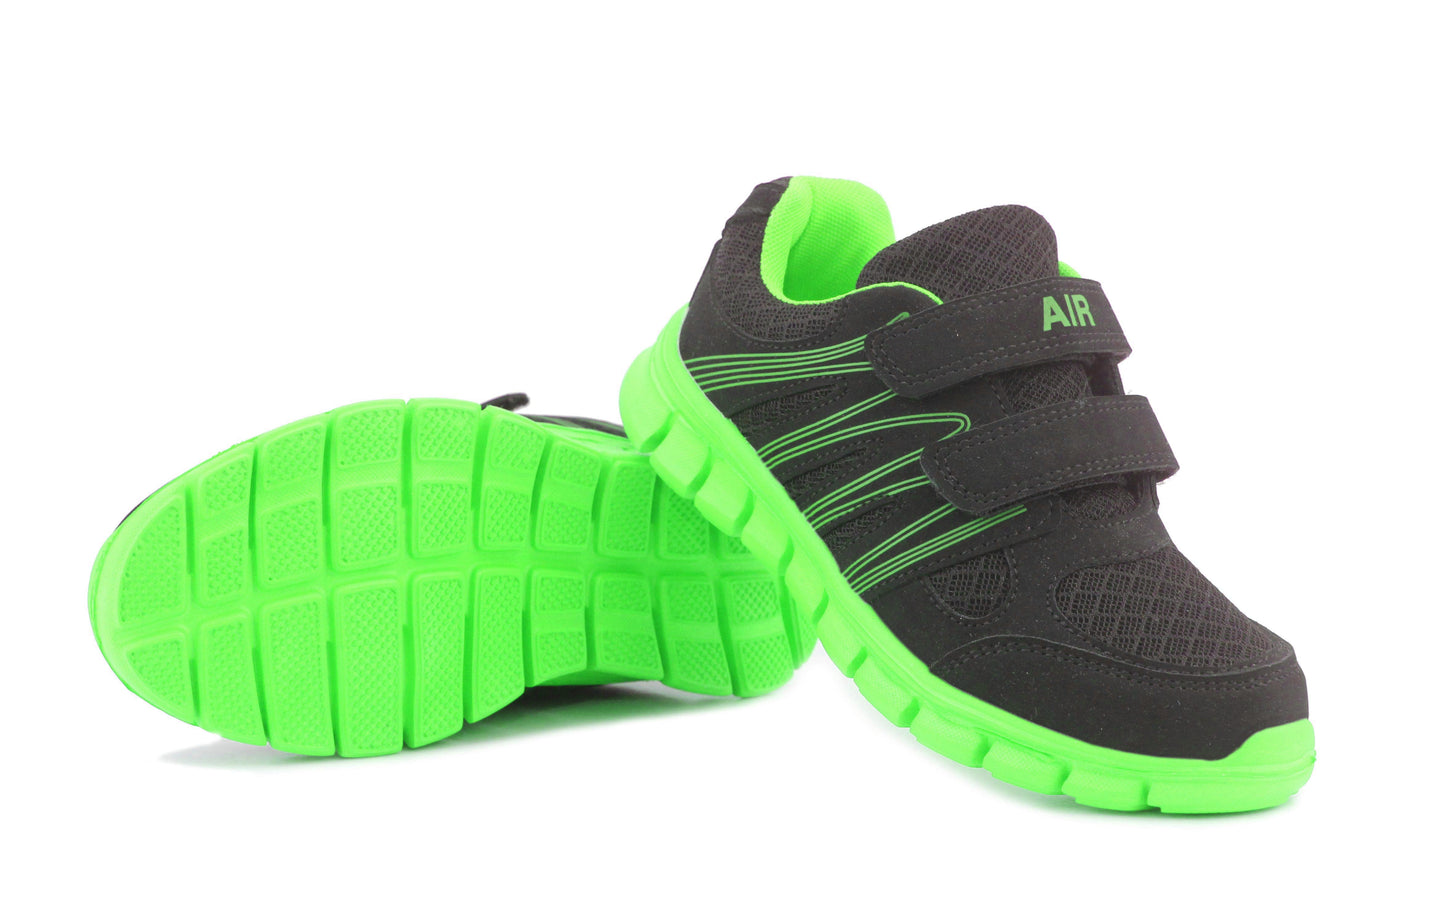 Kids Black Neon Green Youth Super Lightweight EVA Double Touch Fasten Strap Sports Trainers